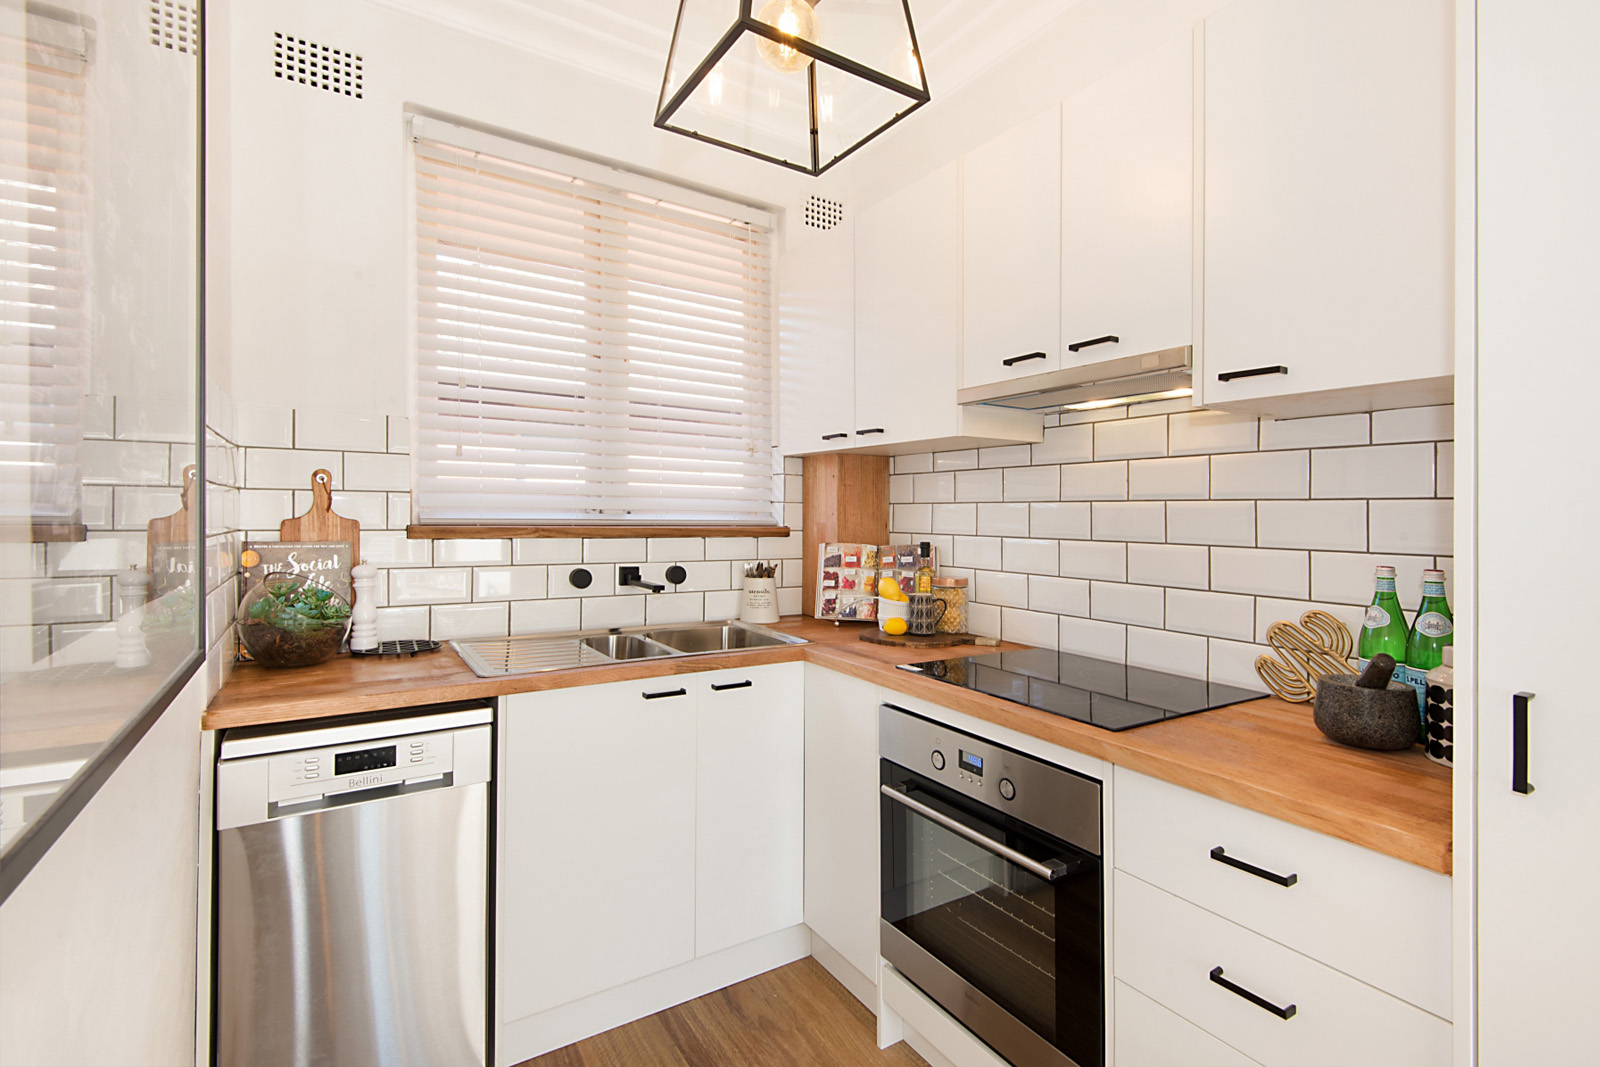 Cherie-Barber_Renovating-For-Profit_Apartment-Transformation_Kitchen-After